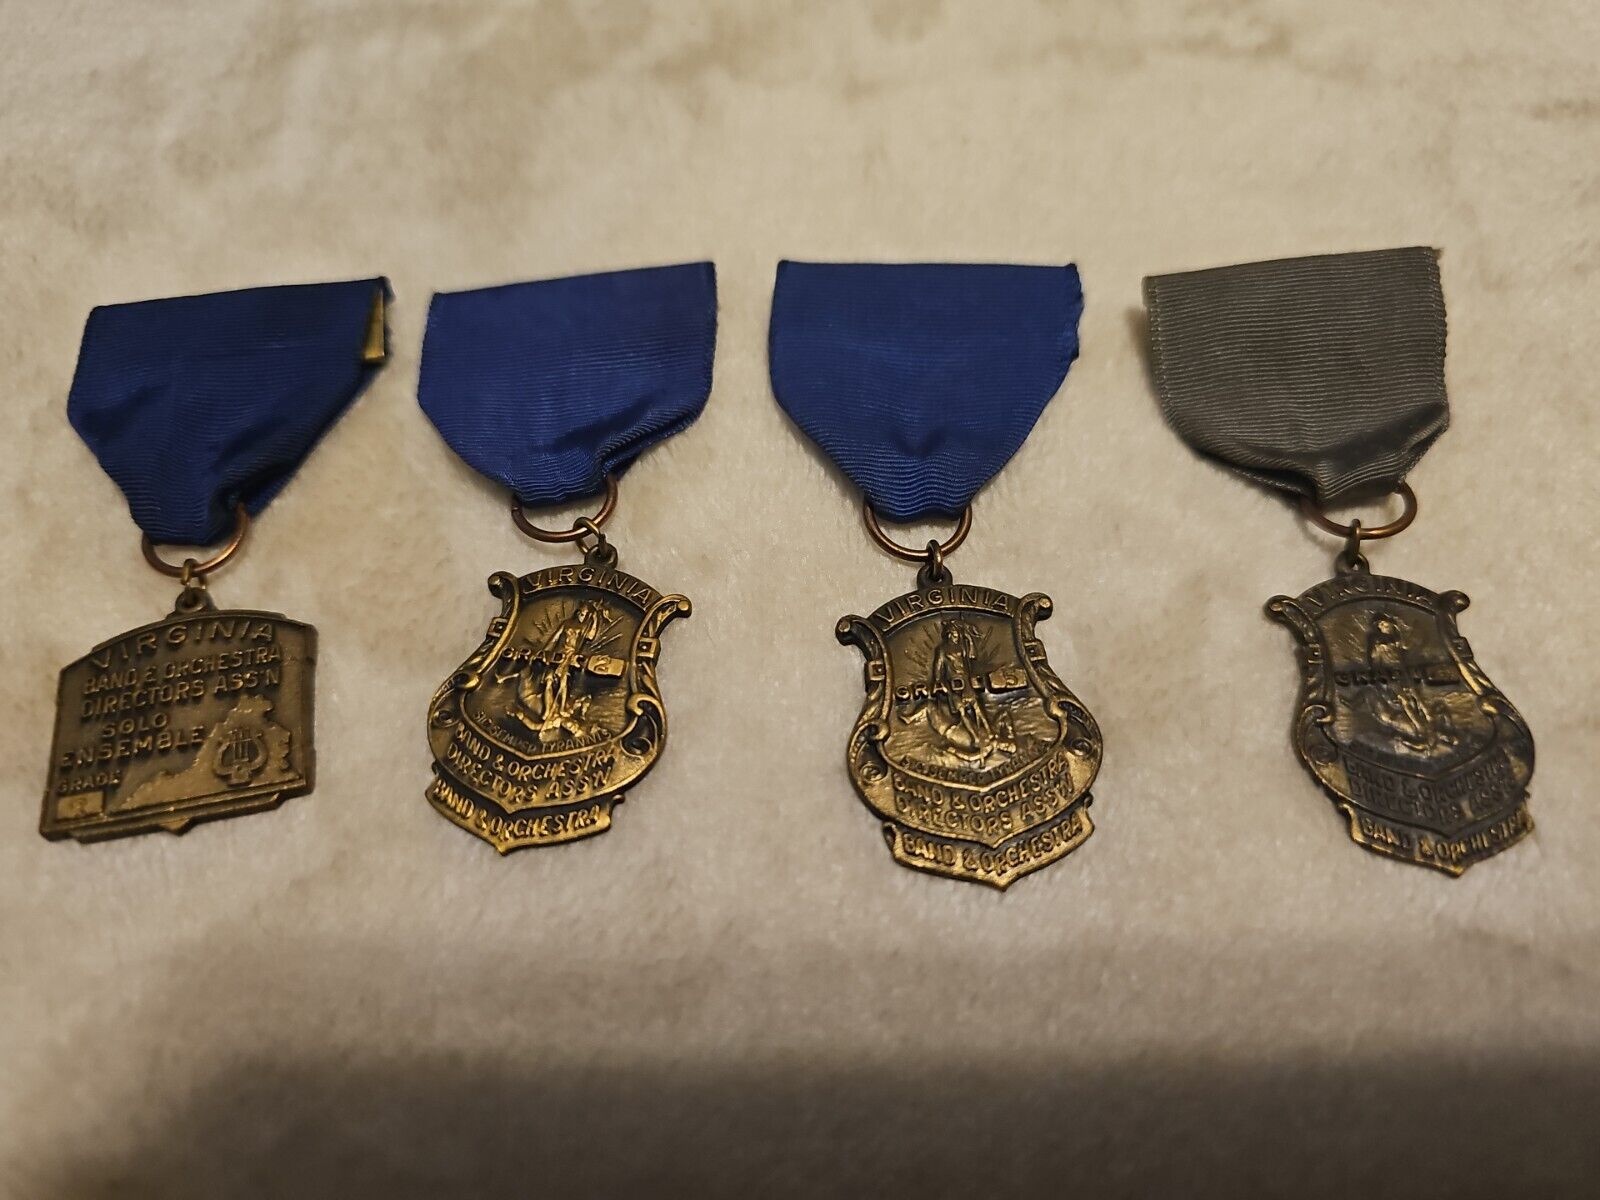 Lot Of 4-V.M.I. Virginia Military Institute-Cadet Band & Orchestra Medals